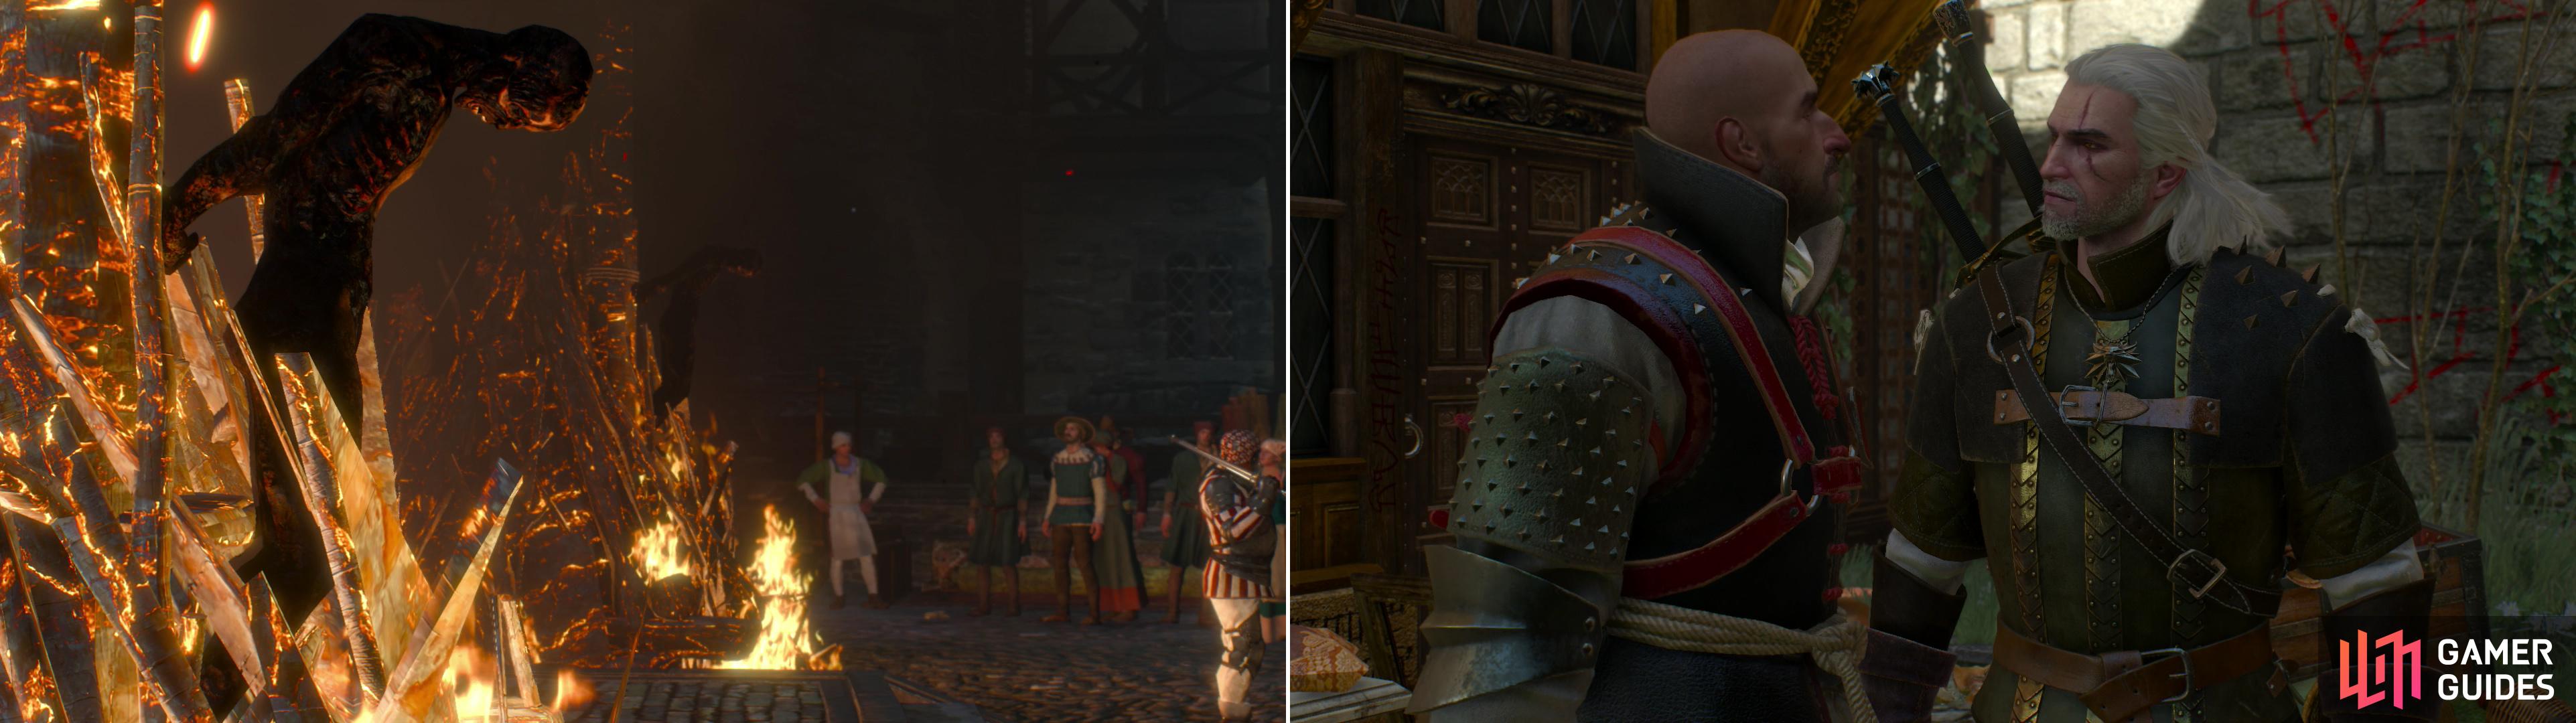 The Cult of the Eternal Fire has made Novigrad a dangerous place for mages and other magical “deviants” (left). Menge, the leader of the city’s Witch Hunters, is a particularly unlikable fellow (right).